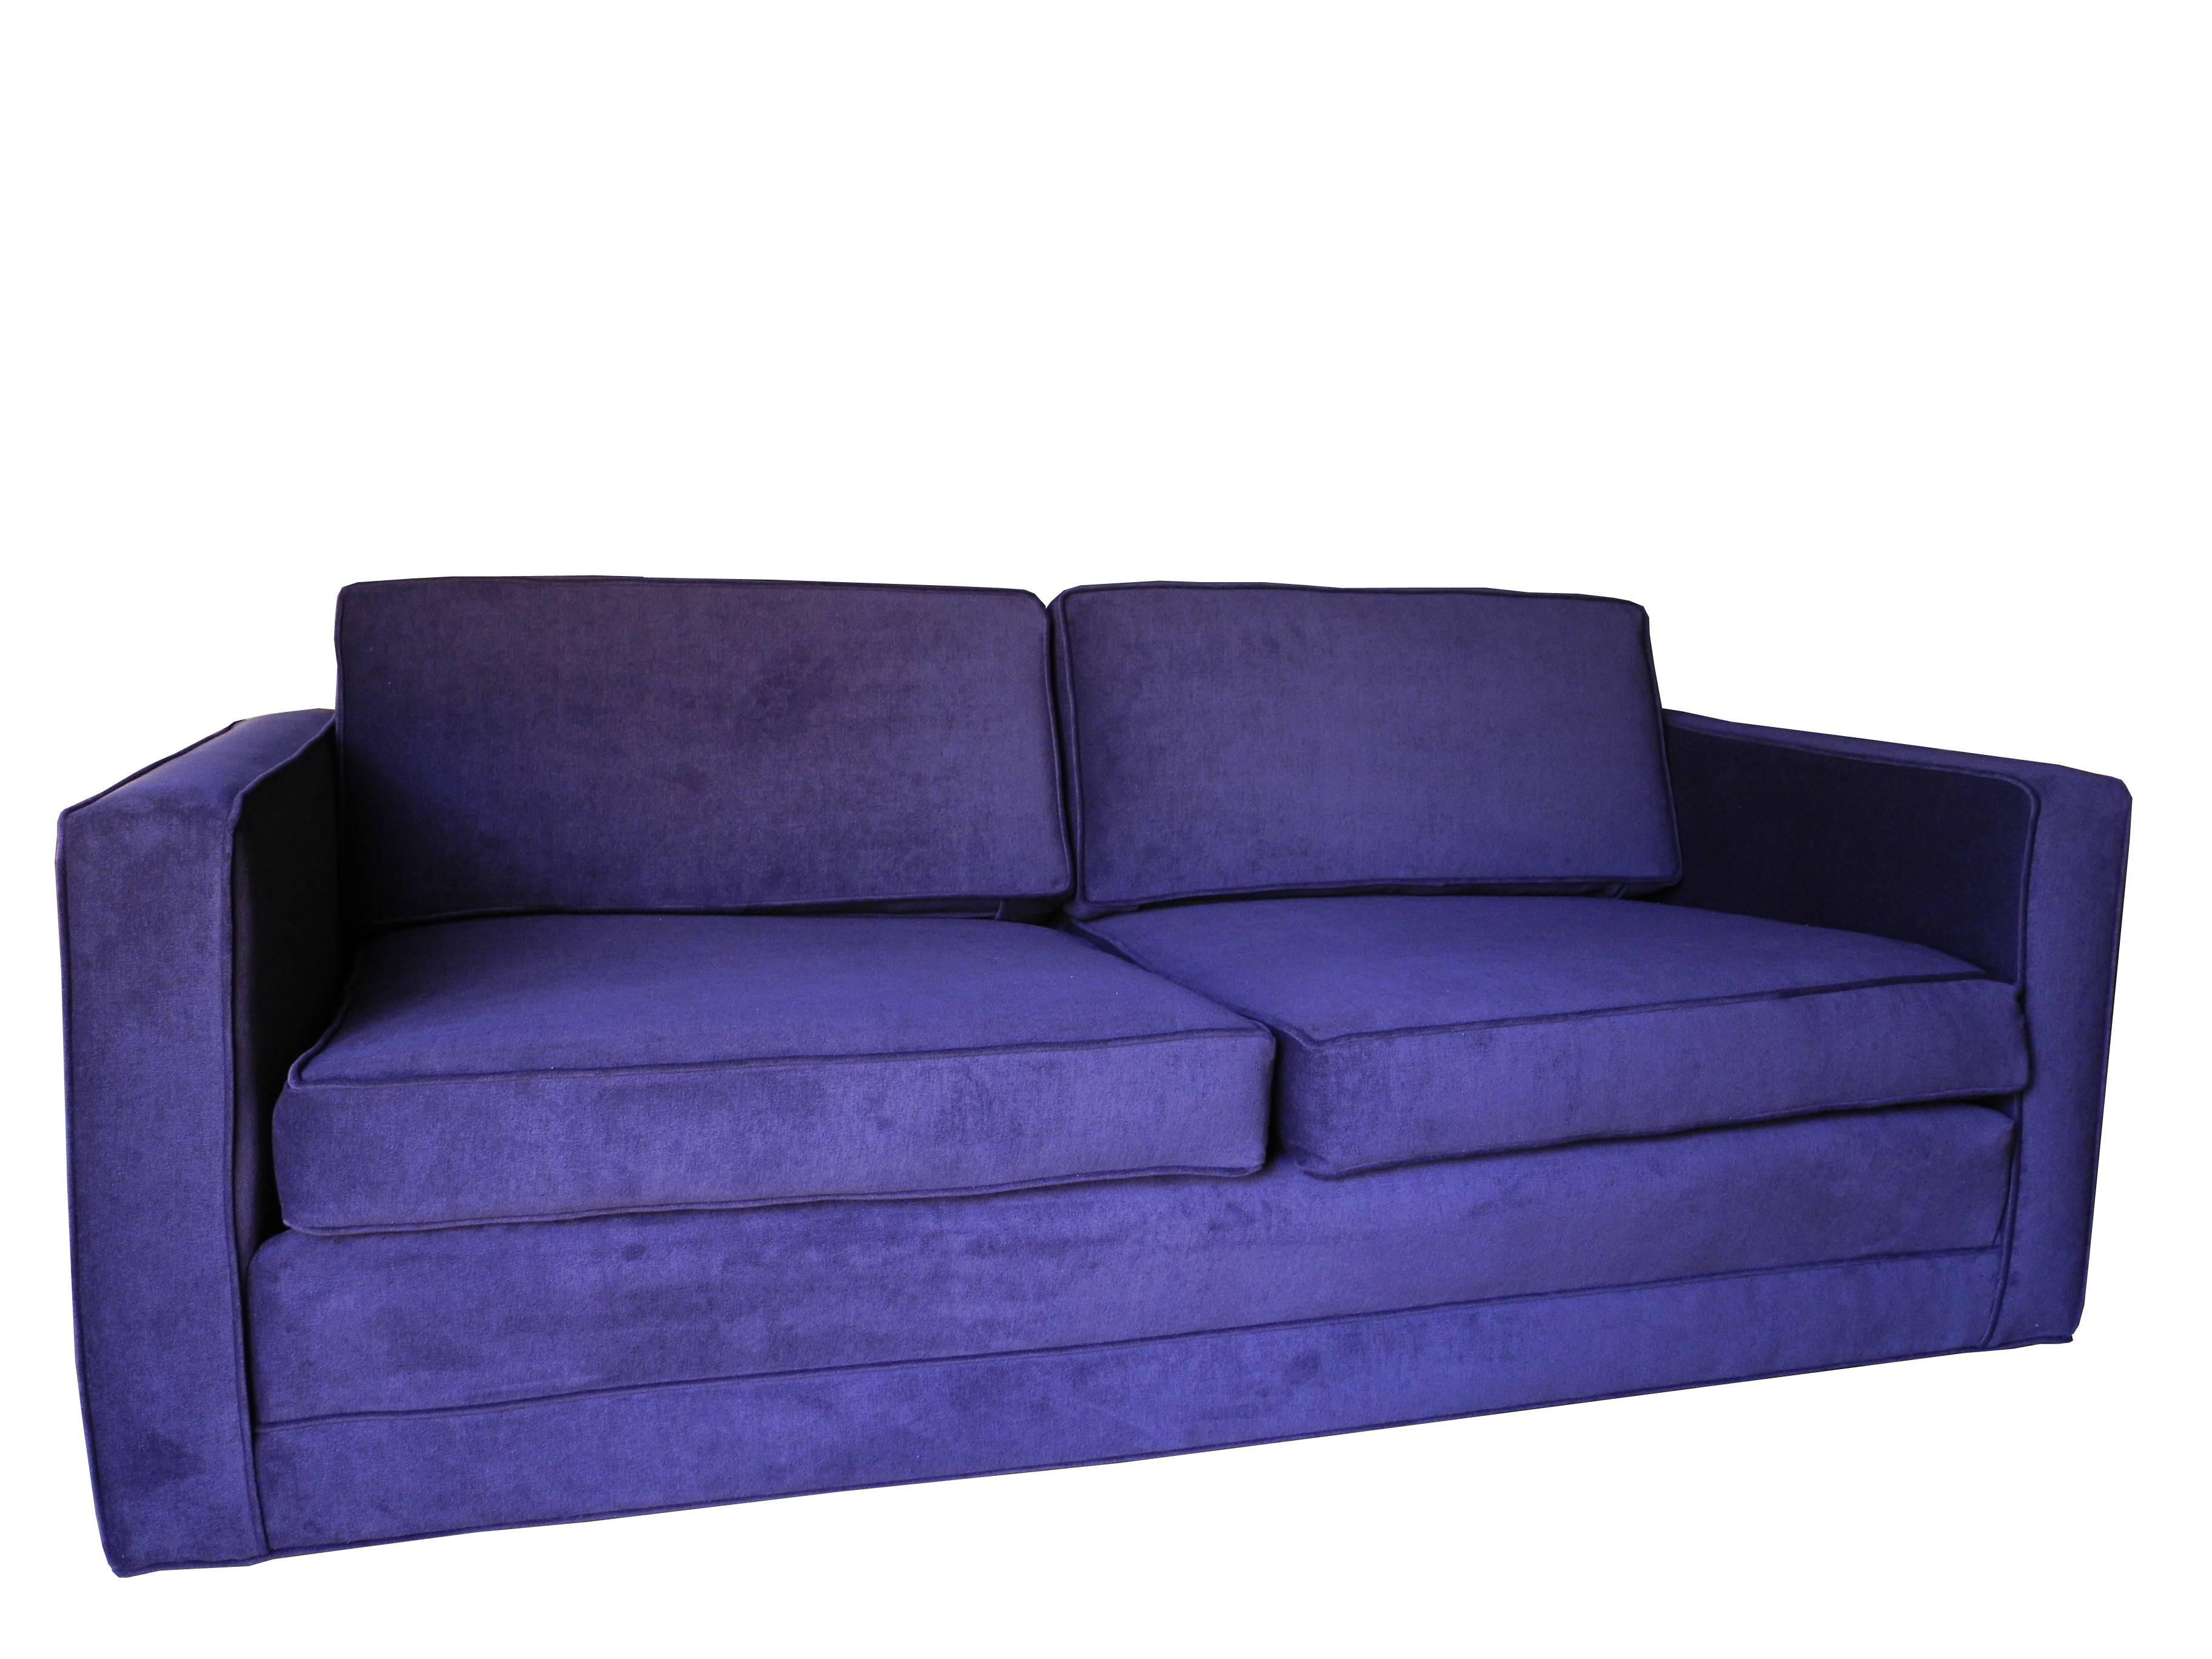 This ultra modern boxy custom settee designed by Charles Pfister for the home or office is upholstered in a deep aubergine / purple cotton velvet. The arm height is 24". Seat height is 16". The top of the back cushion is 28". 68"